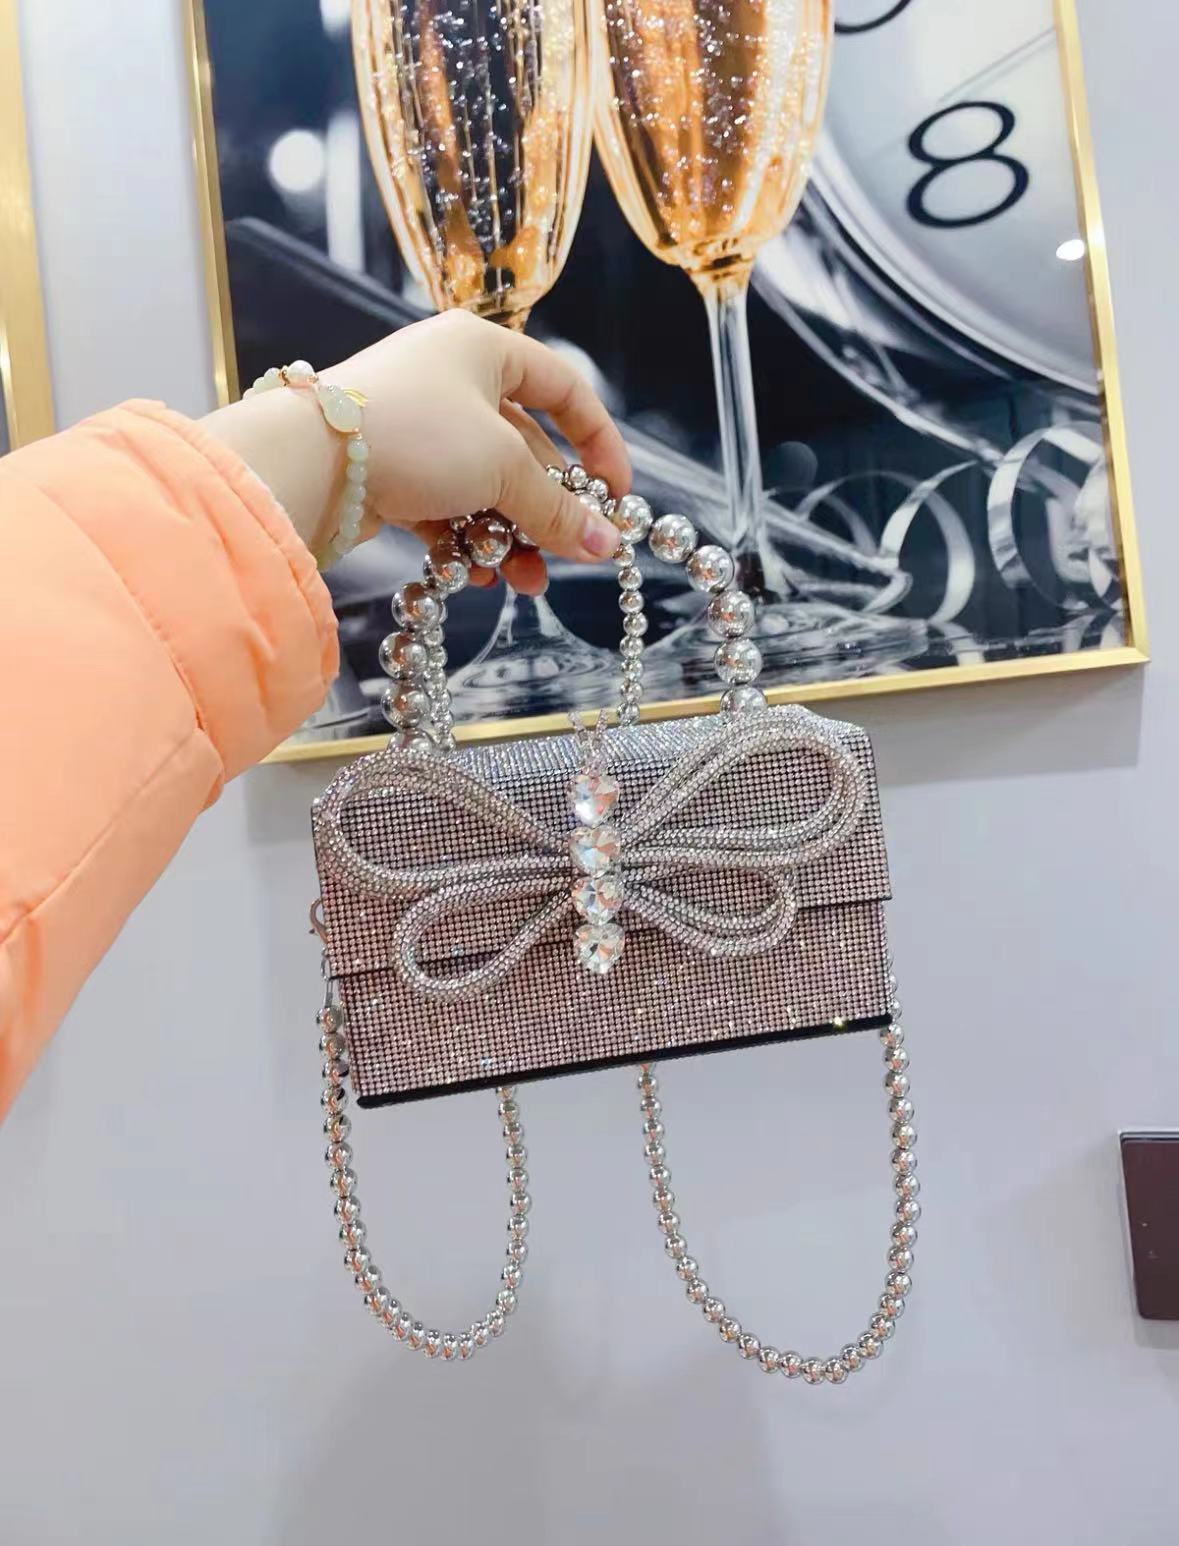 Women's All Over Rhinestones Bowknot Evening Clutch Bags in Silver photo review